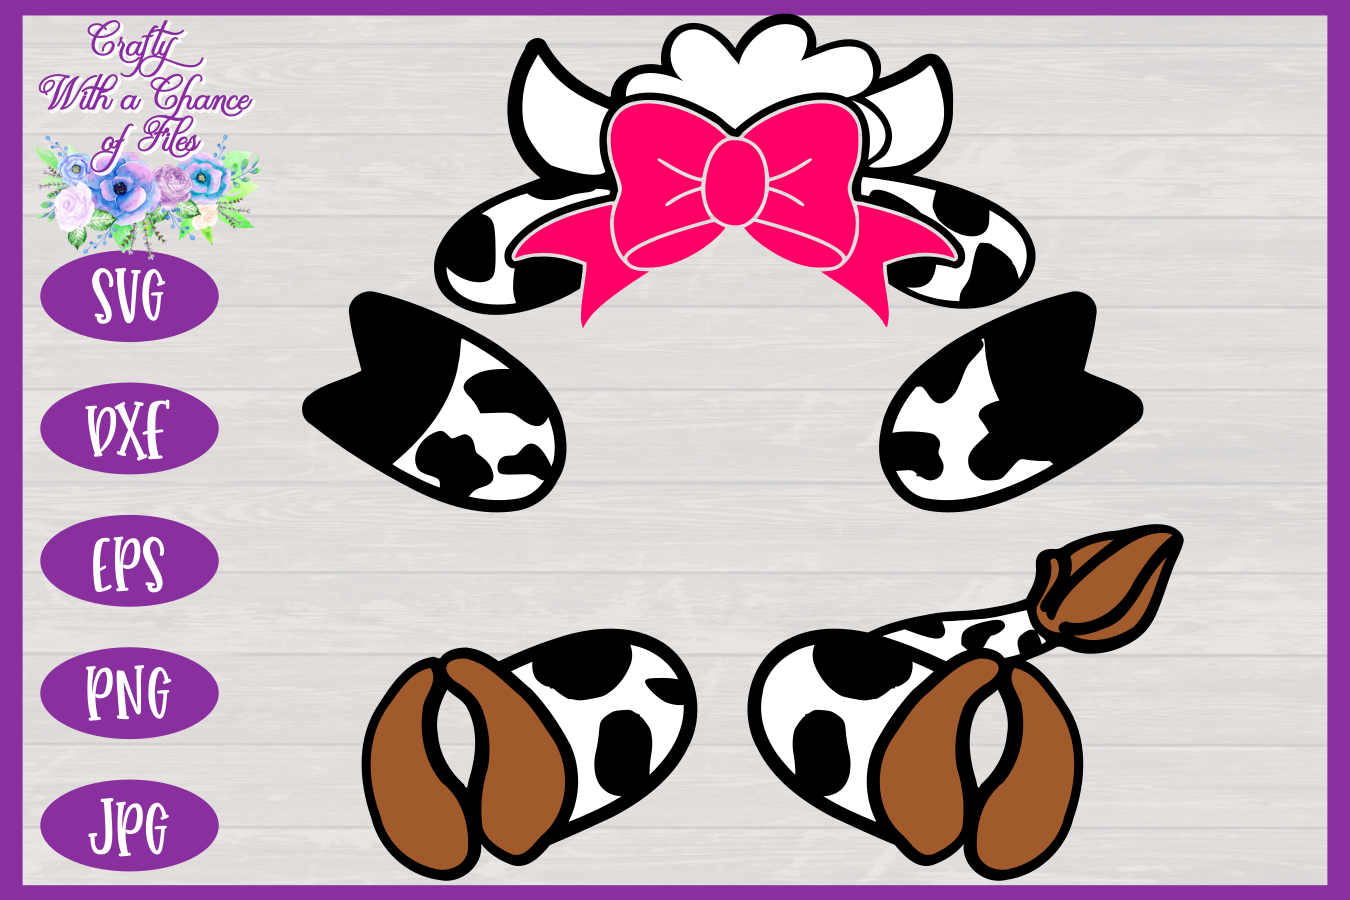 Download Cow Svg Cow Monogram Svg Farm Animal Svg Easter Svg By Crafty With A Chance Of Files Thehungryjpeg Com